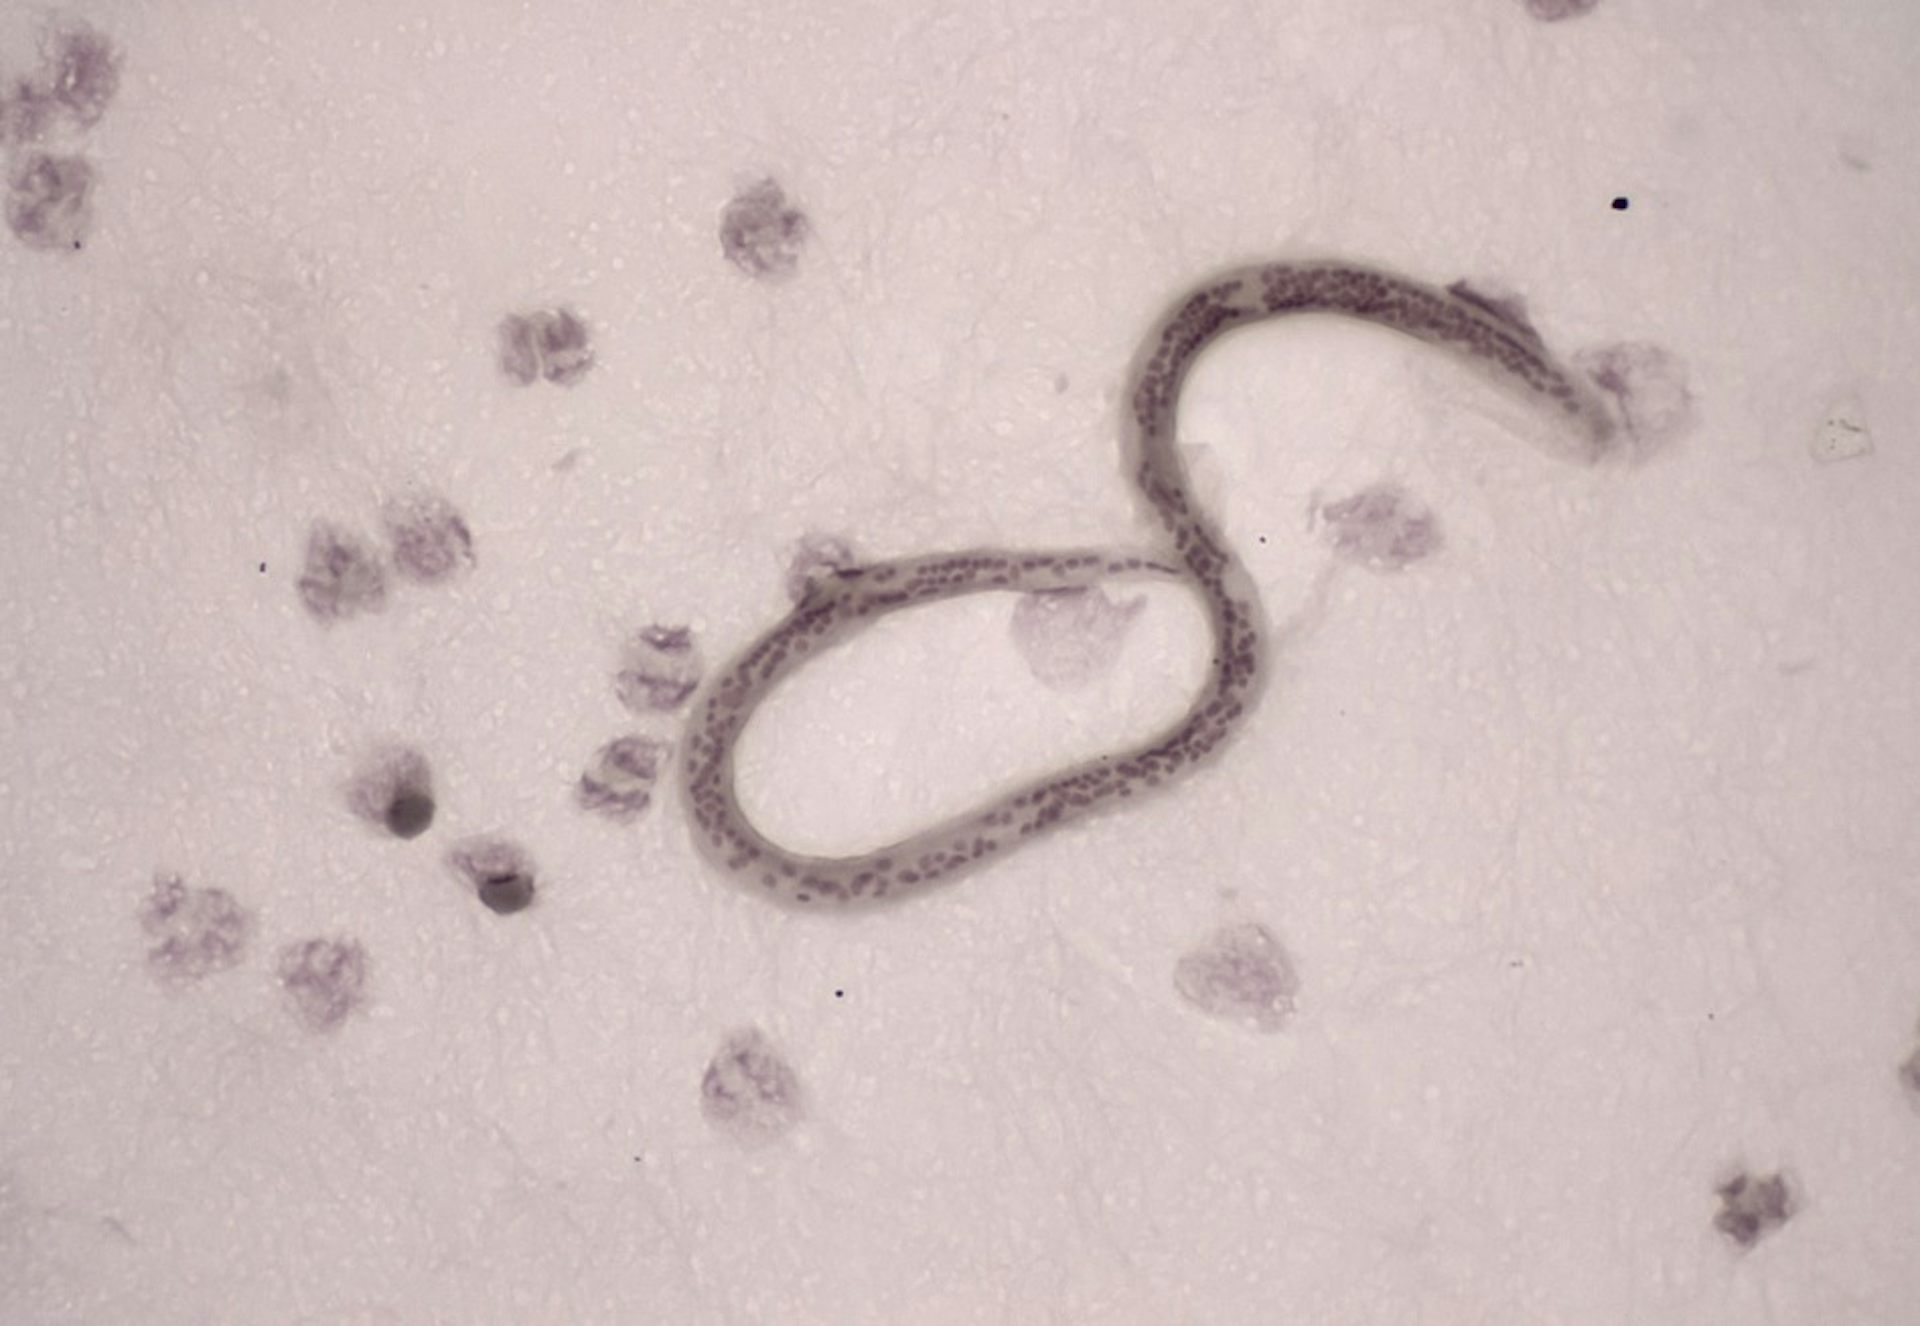 Types of human parasite Worms infections and causes